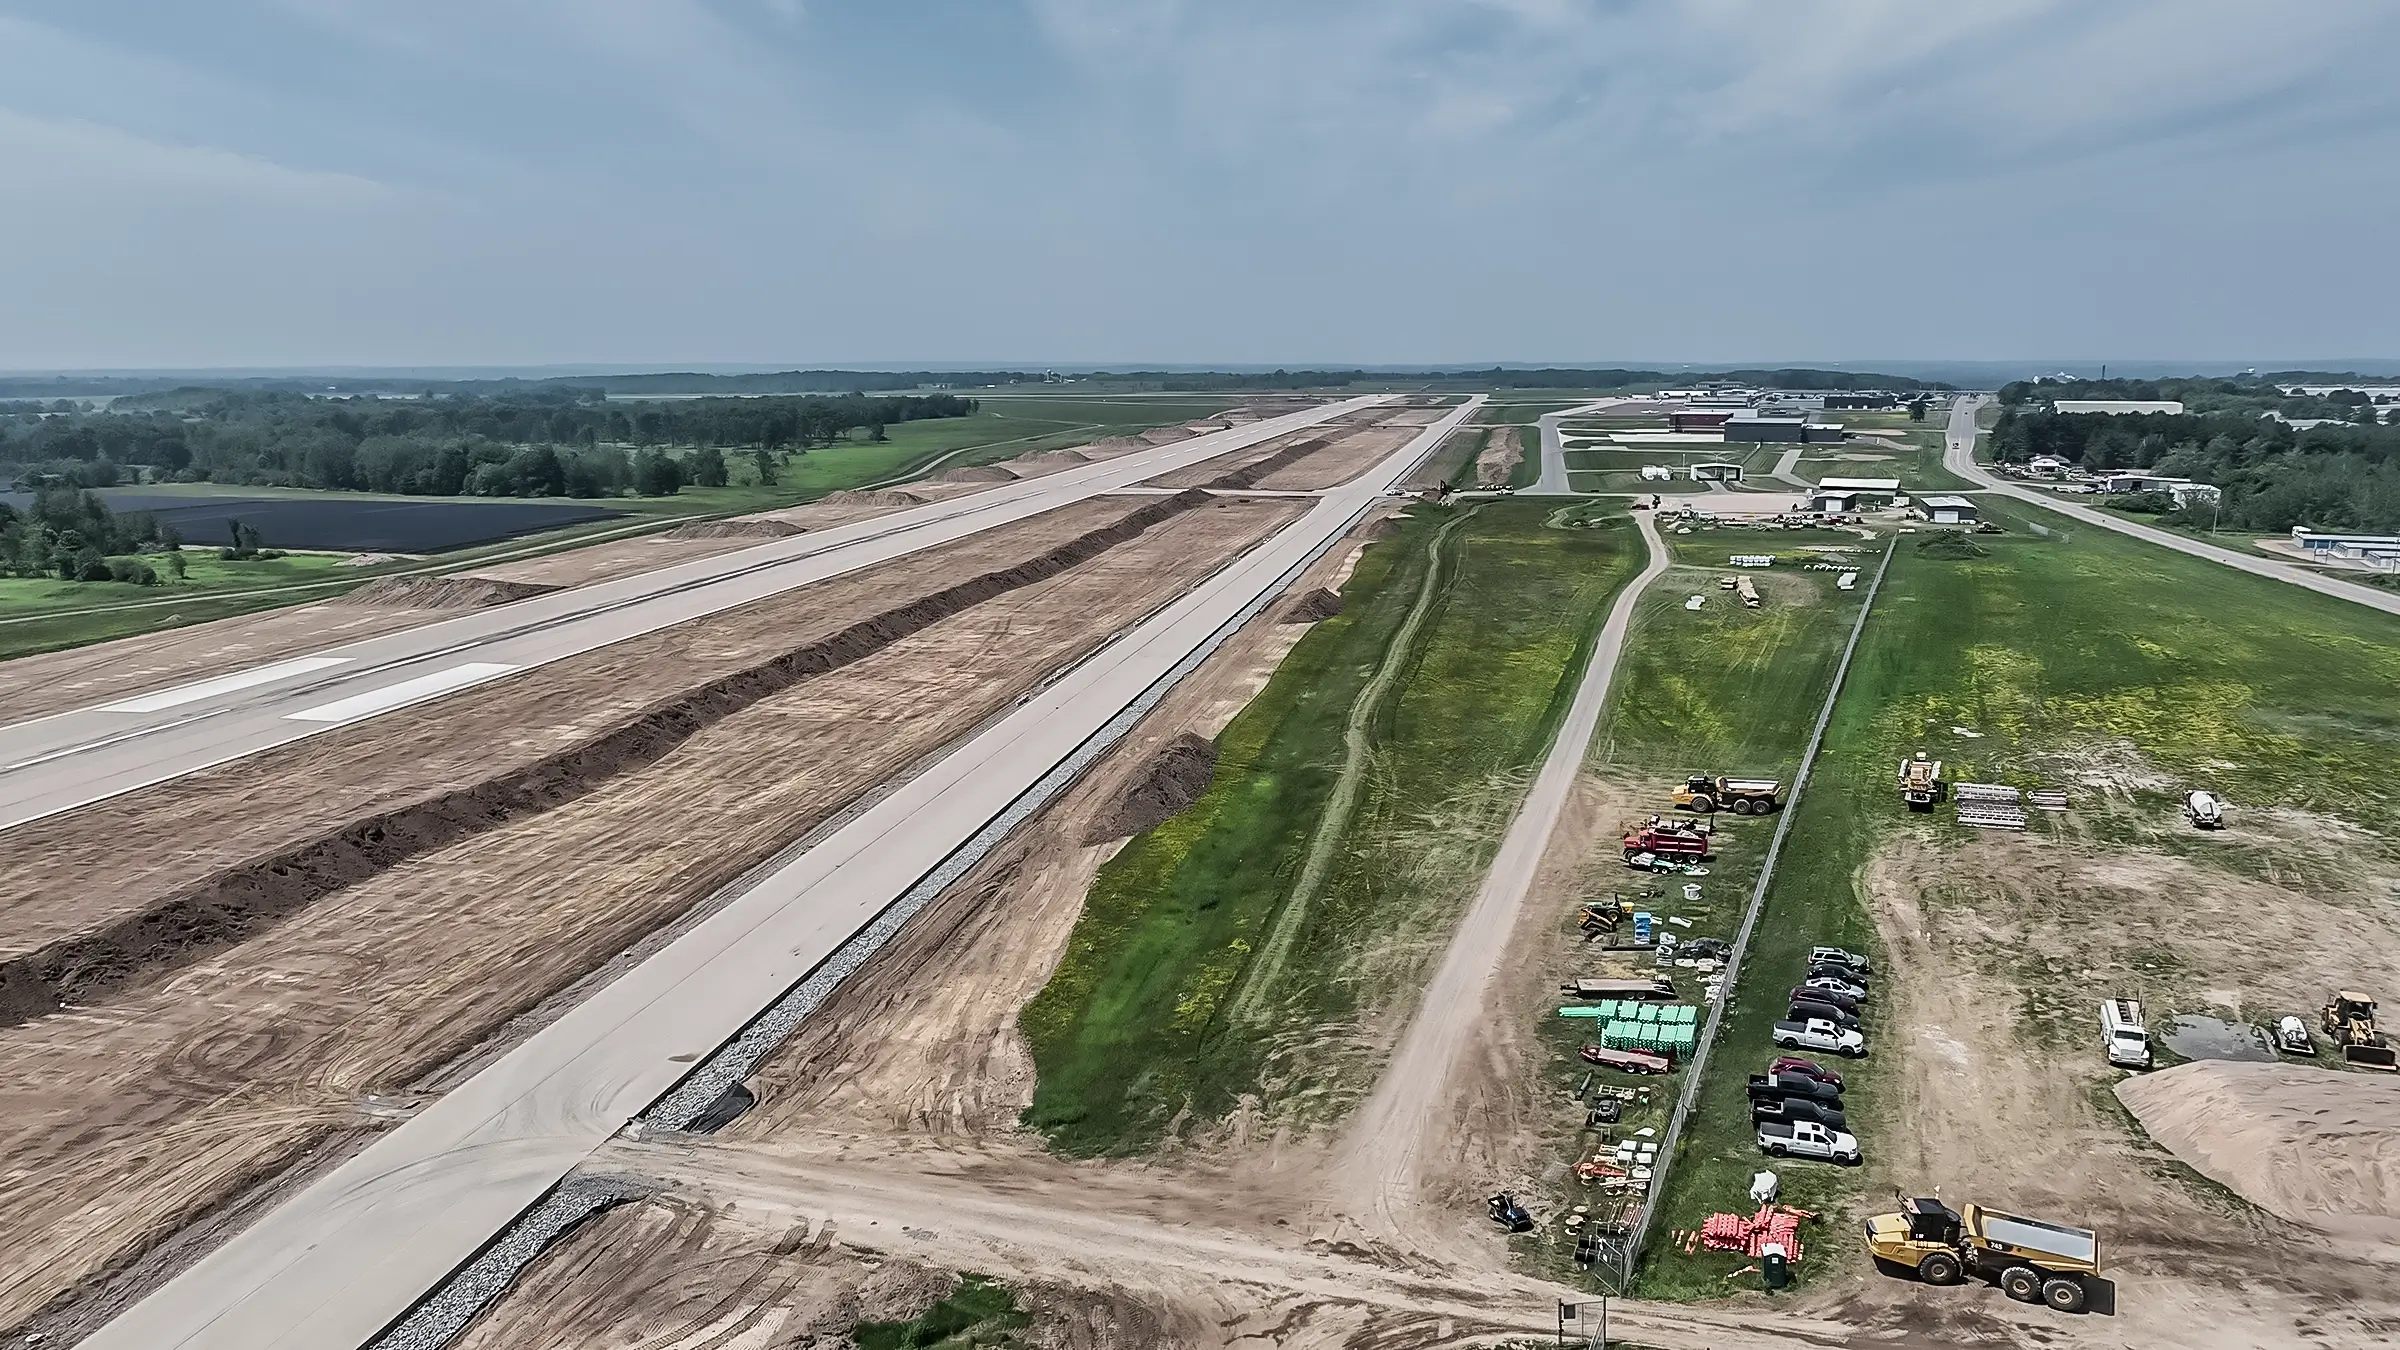 Central WI airport runway with construction alongside it.